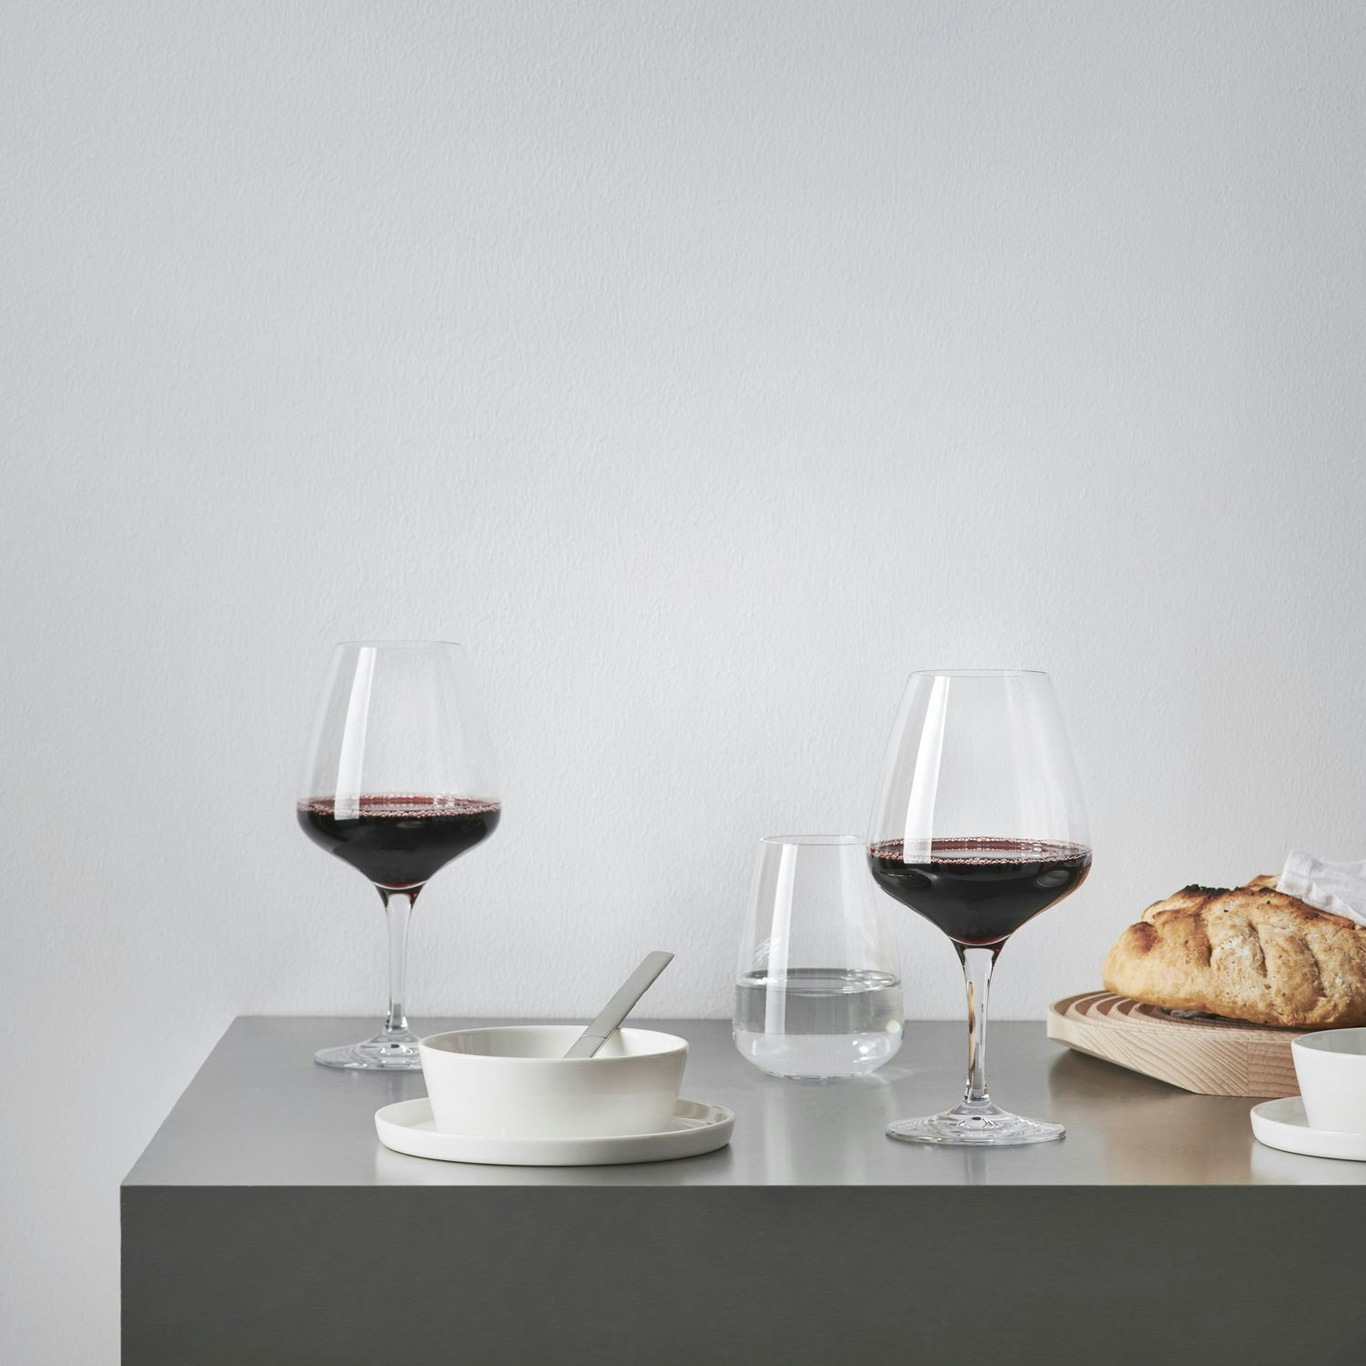 The Moment Riesling White Wine Glass 46 cl, 2-pack - Zwiesel @ RoyalDesign